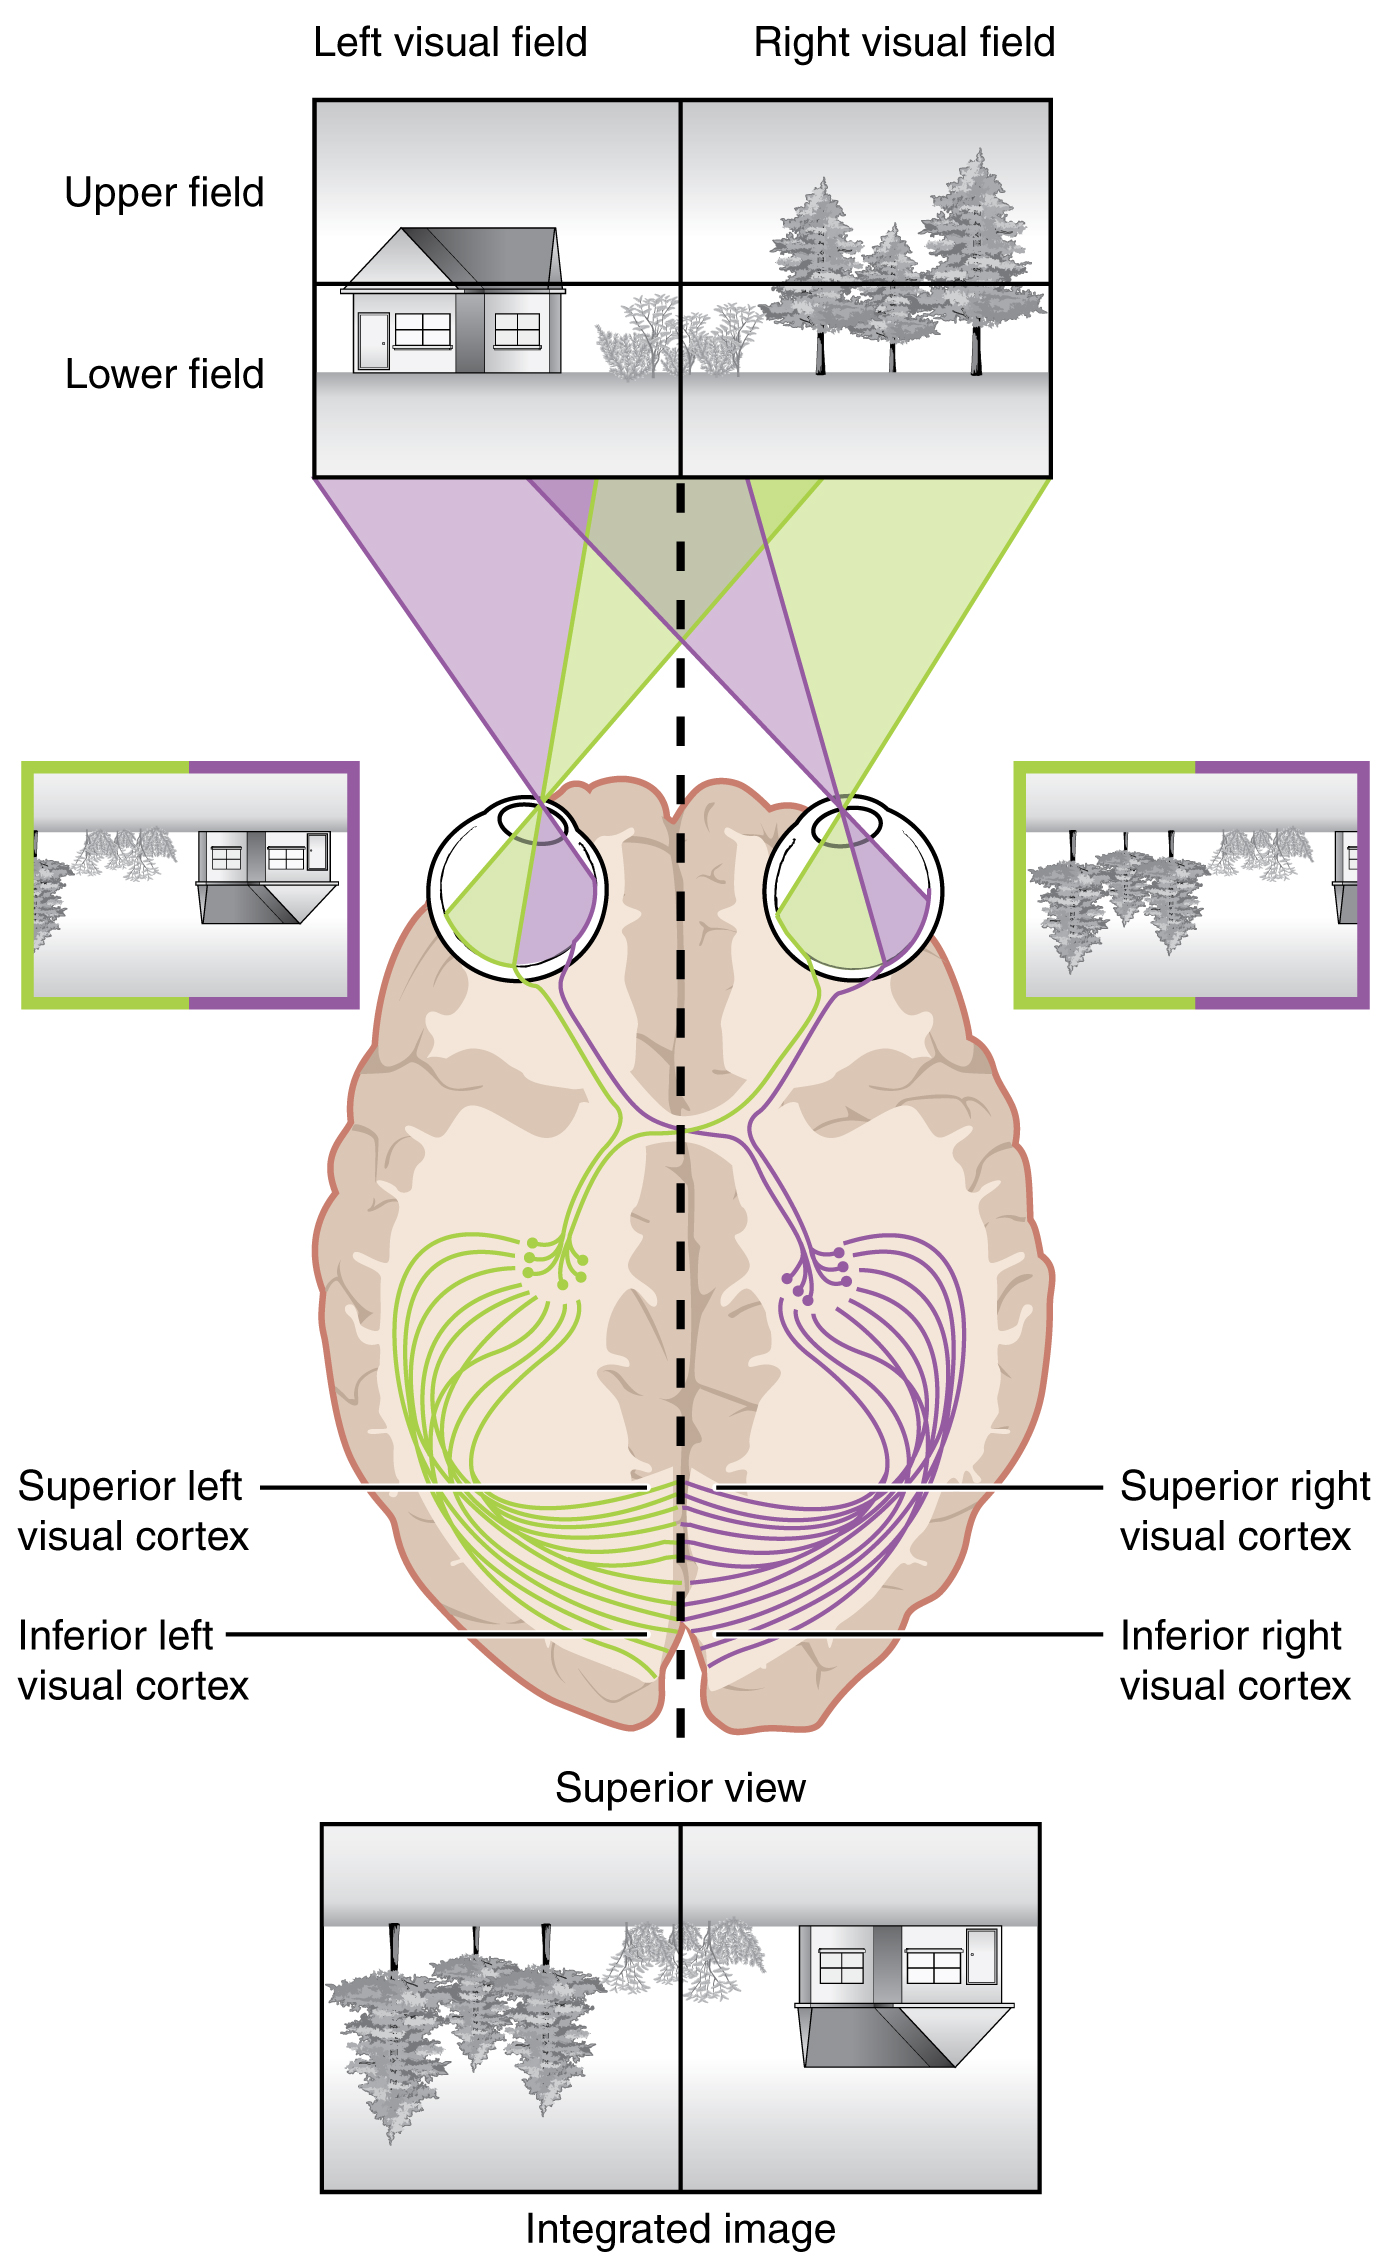 Topographic Mapping of the Retina onto the Visual Cortex